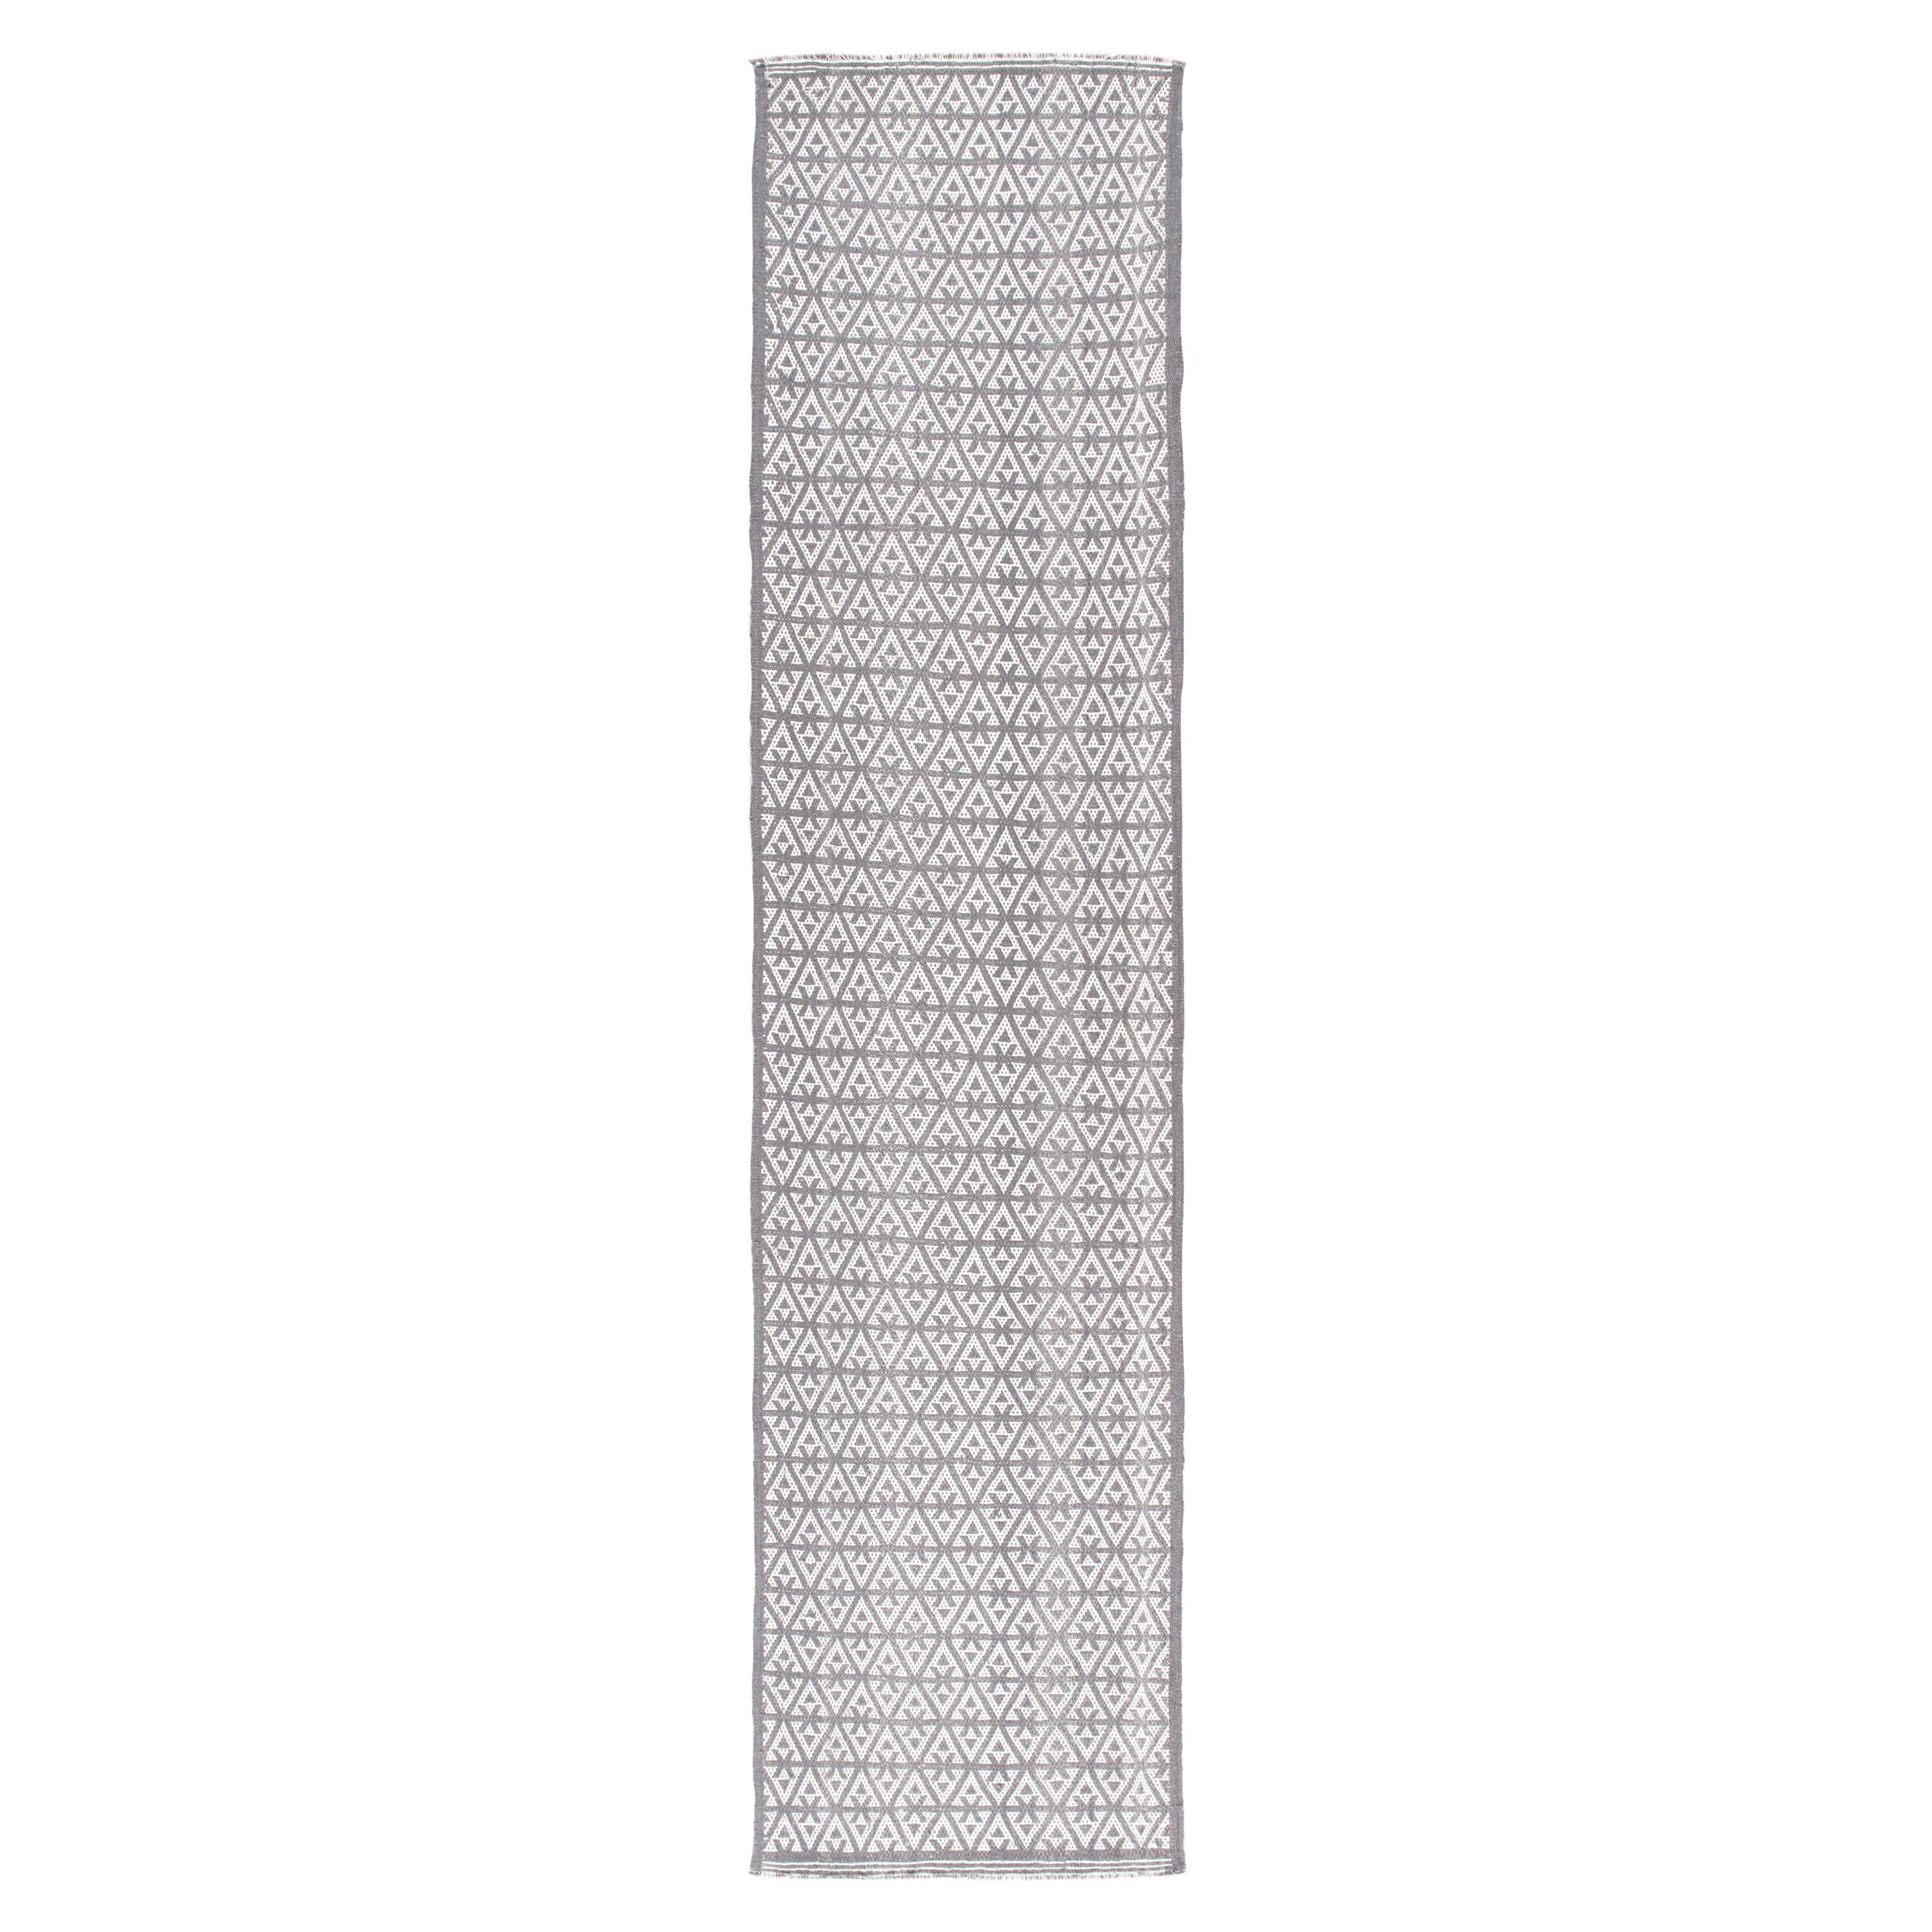 Decorative Handwoven Flat-Weave Runner Rug in Grey and Ivory Color